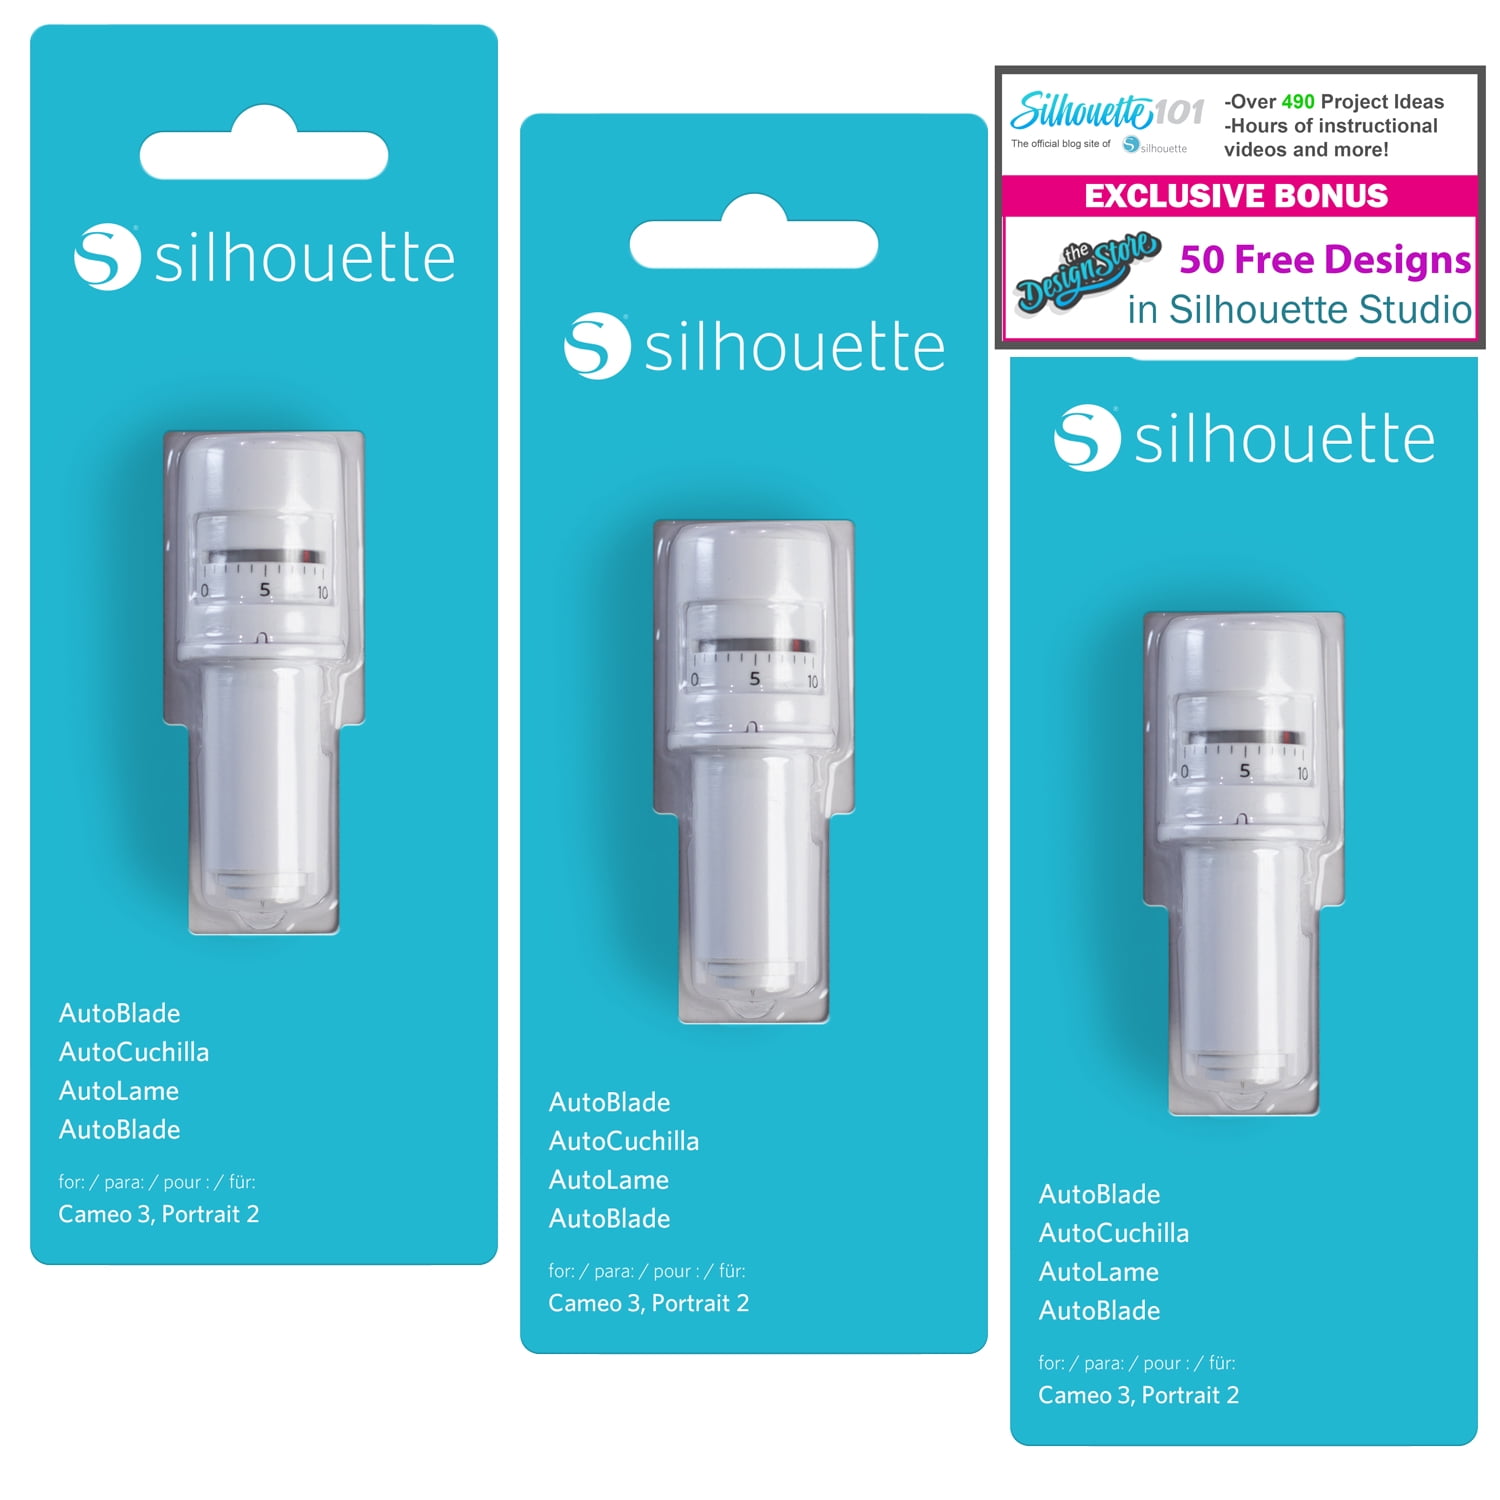 Silhouette White Cameo 4 PRO - 24 Electronic Vinyl & HTV Cutter